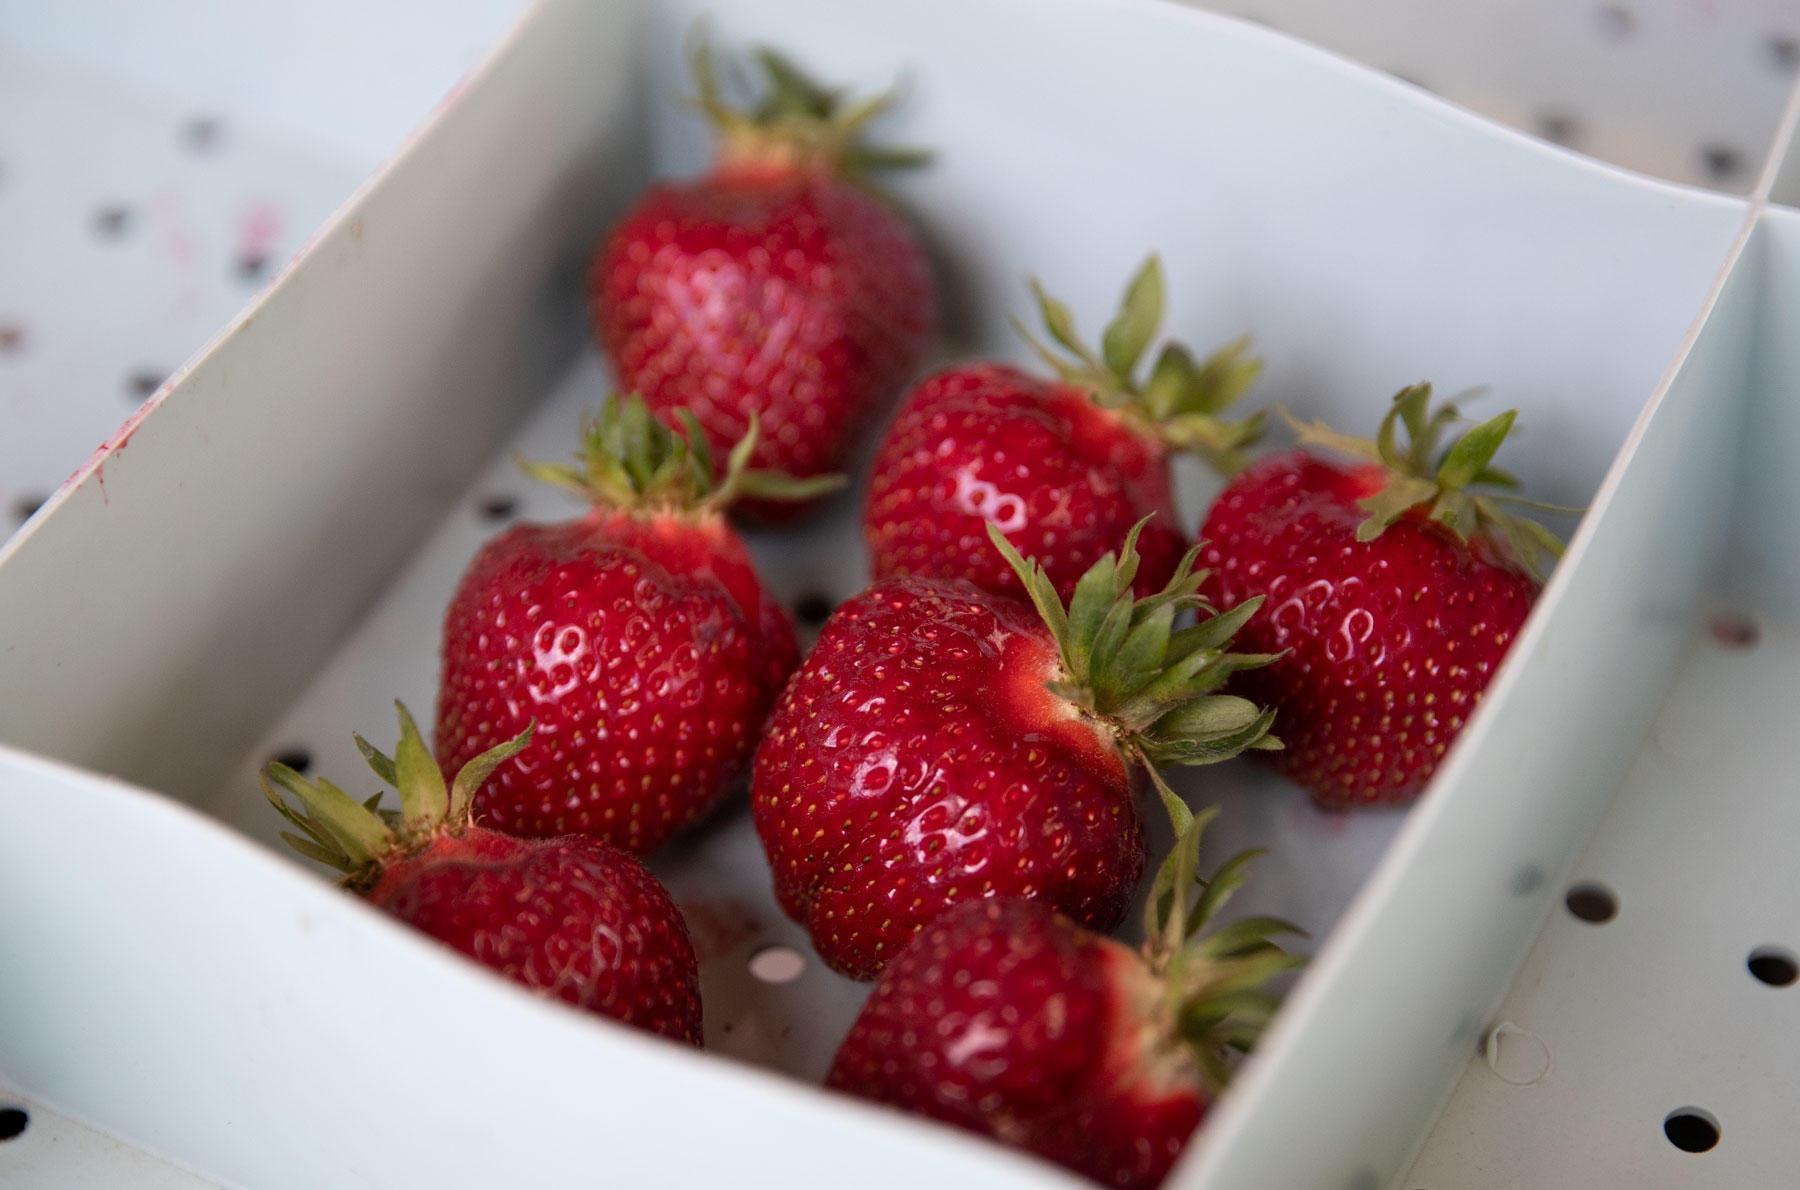 red strawberries in a white container on a table.